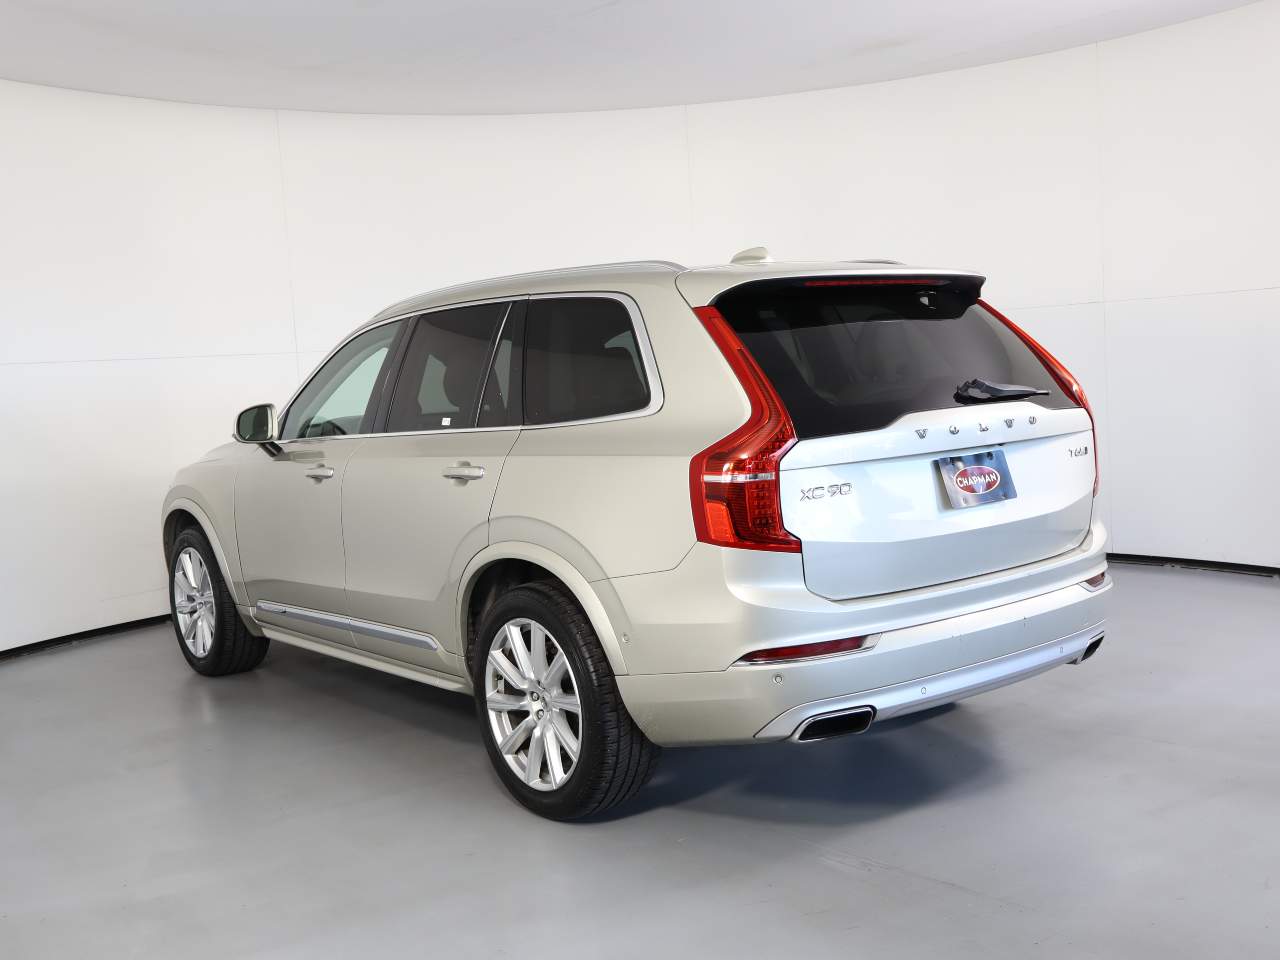 Used 2016 Volvo XC90 Inscription with VIN YV4A22PL1G1017921 for sale in Tucson, AZ